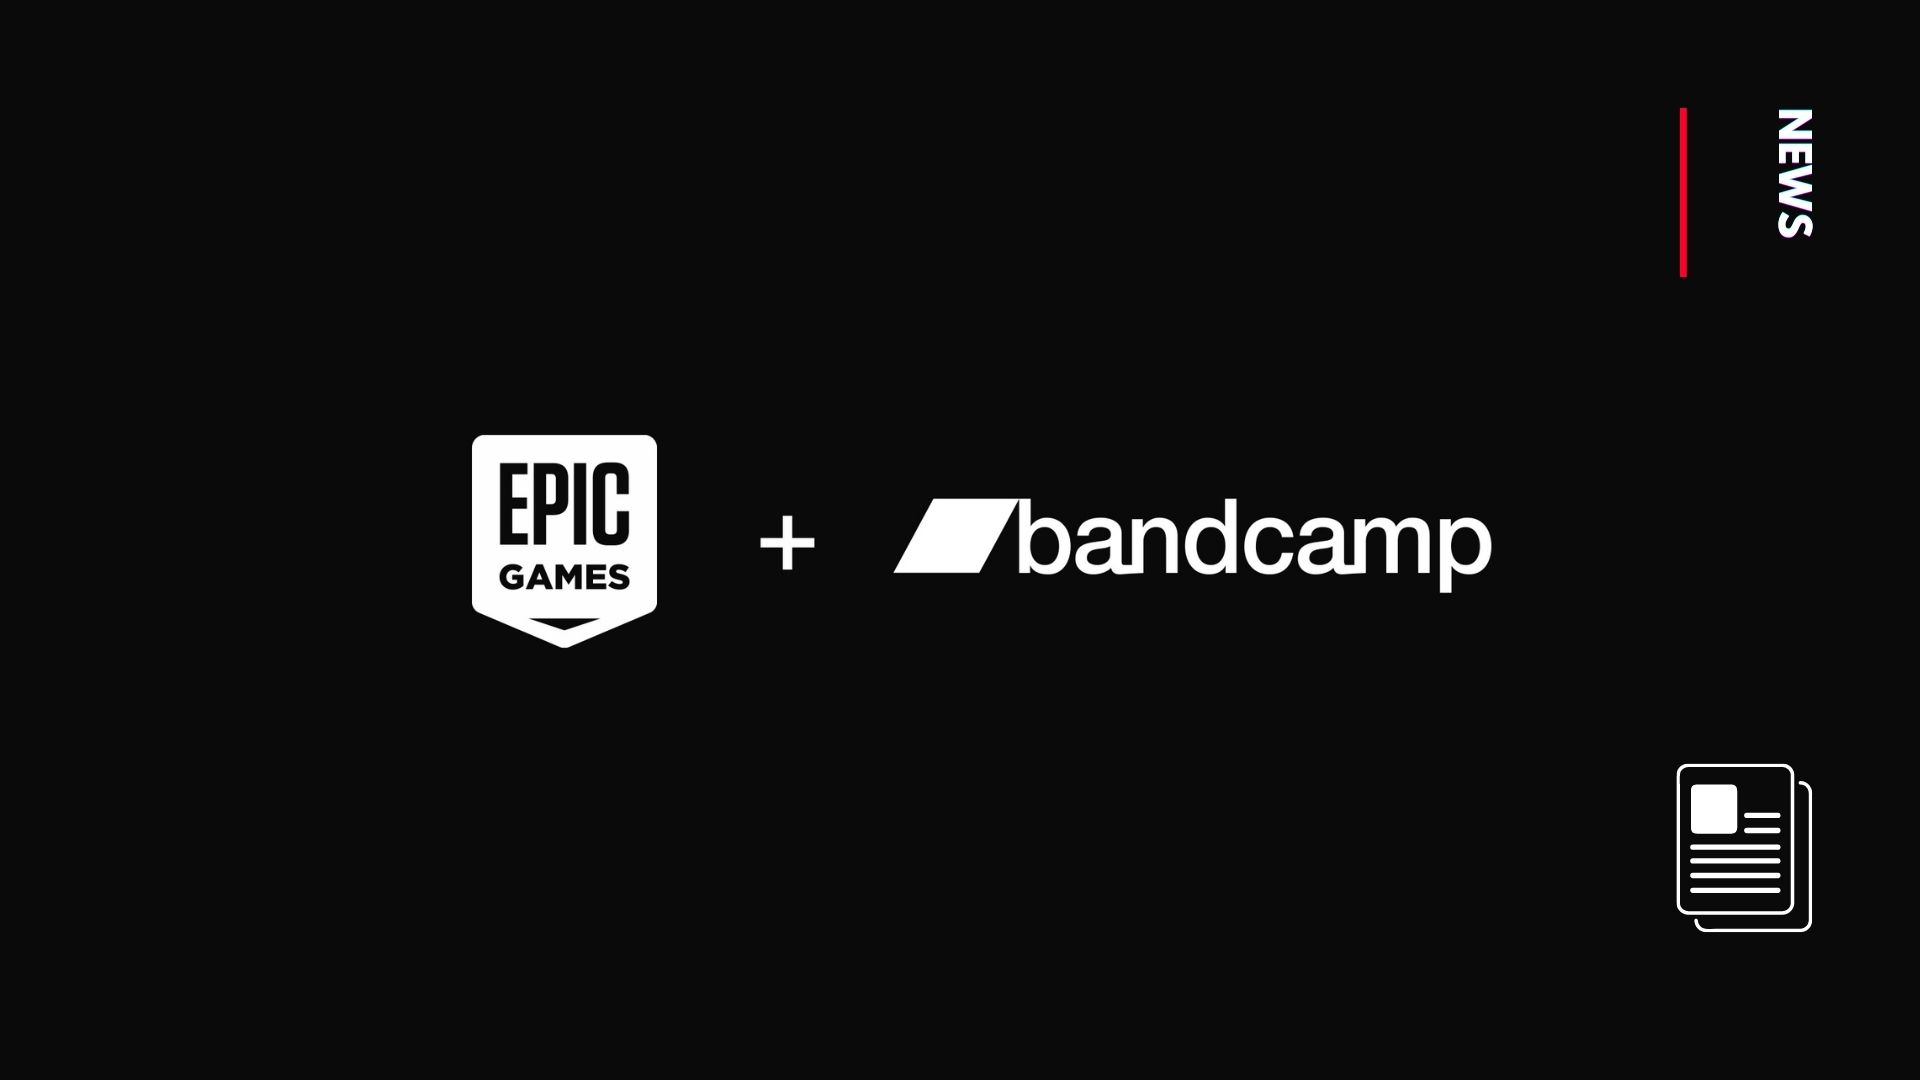 Online record store Bandcamp acquired by Epic Games